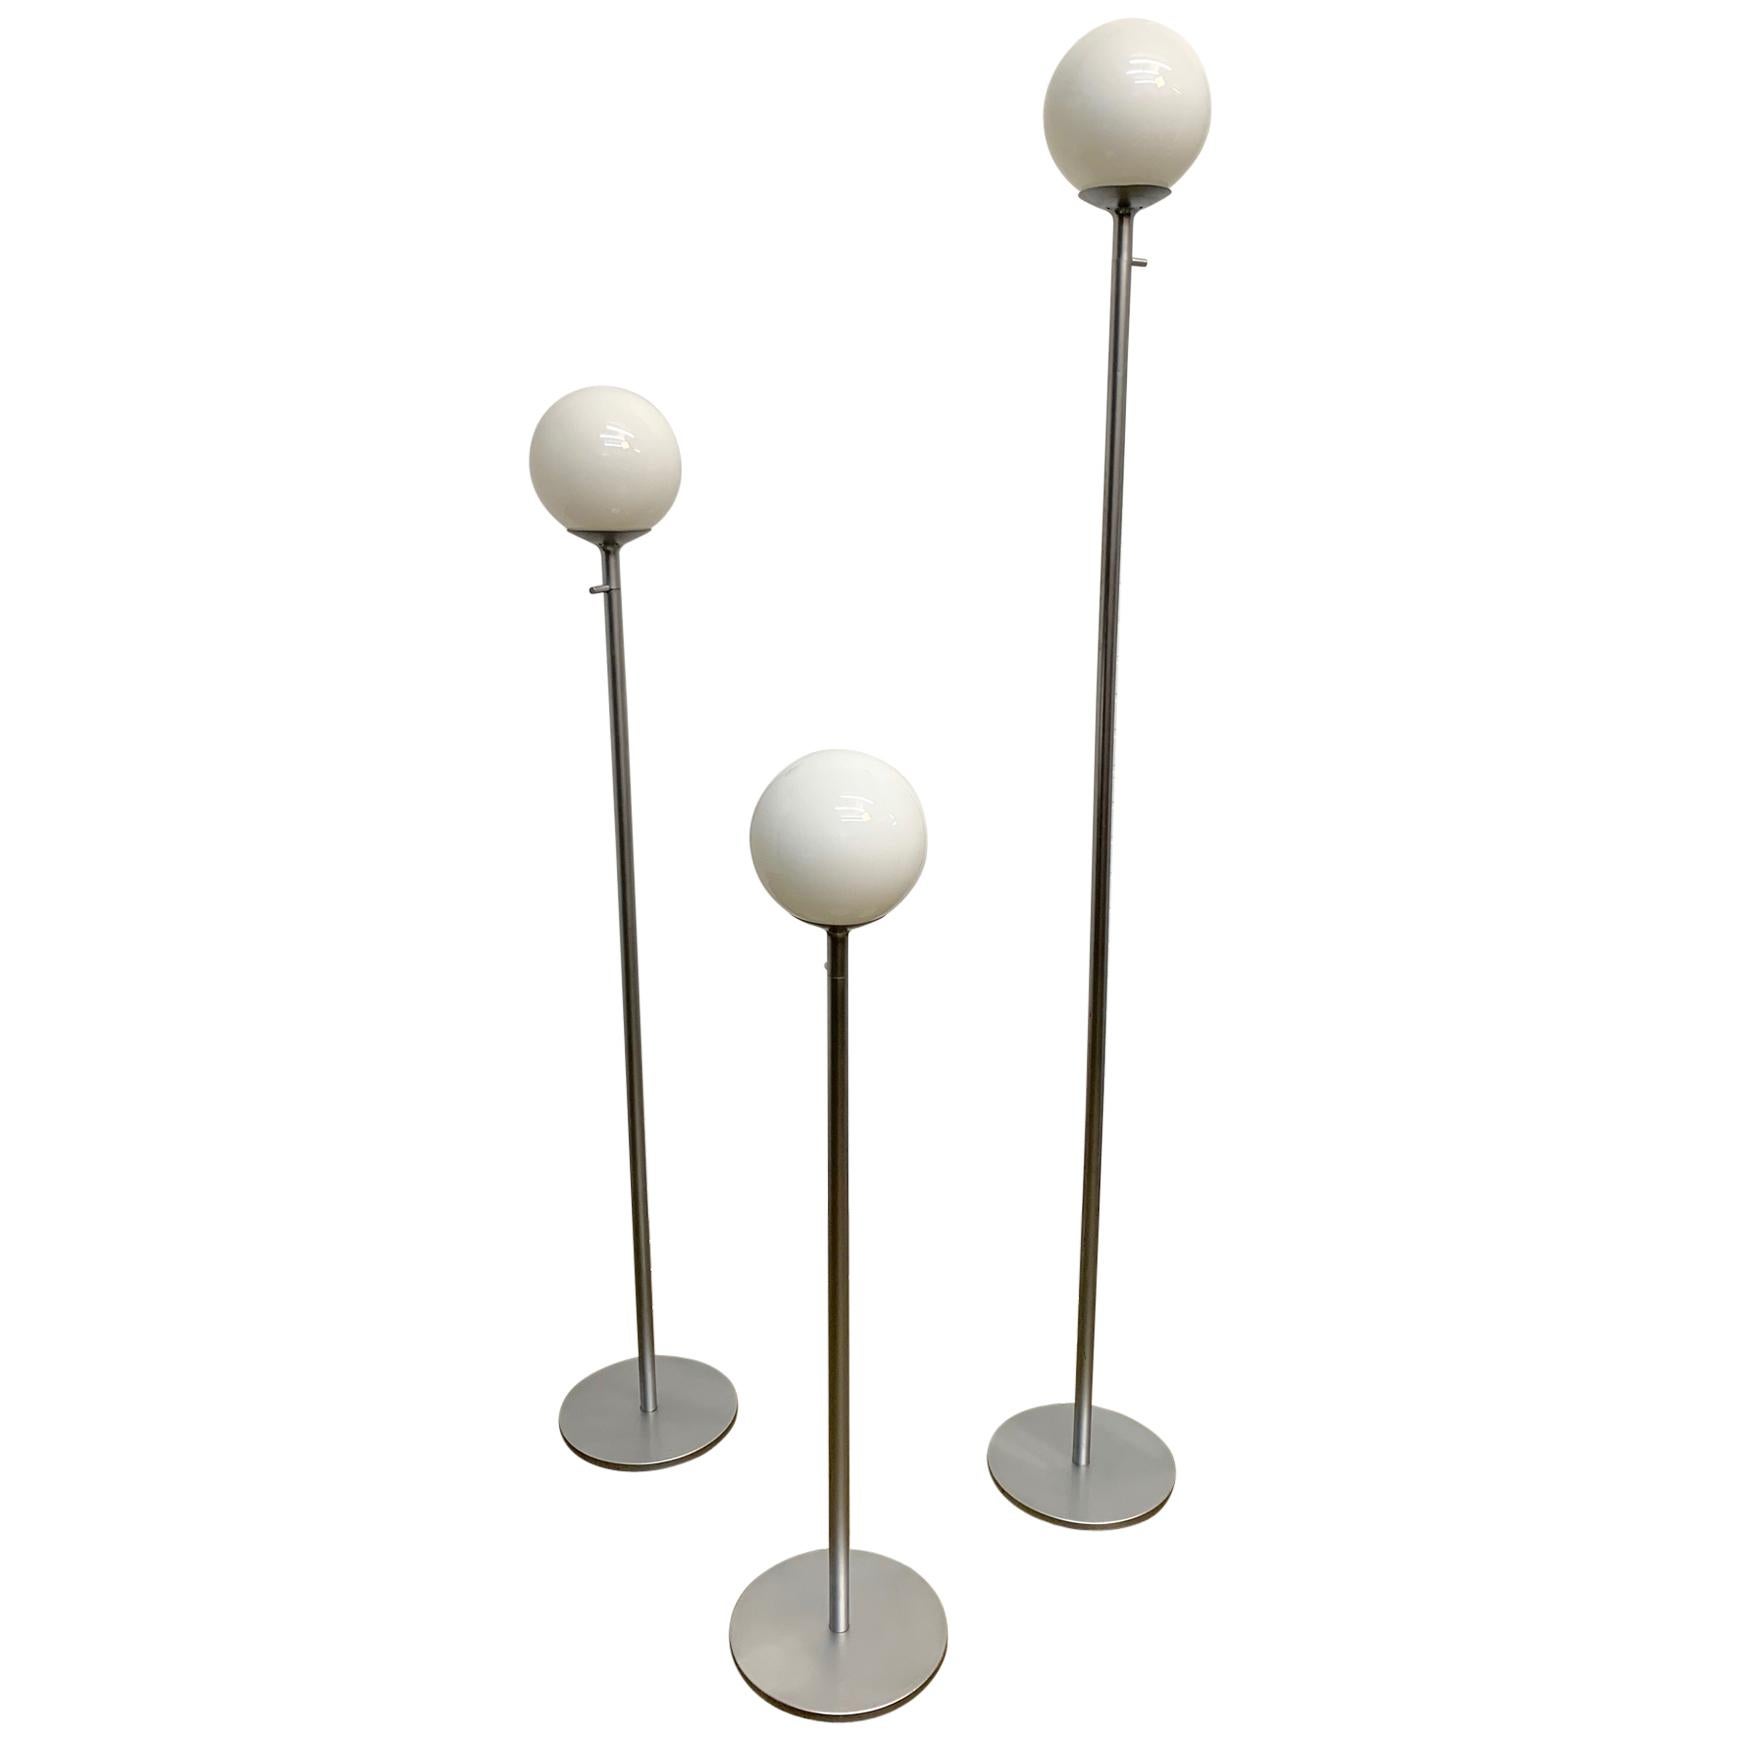 Vintage Globe Floor Lamps by ClassiCon